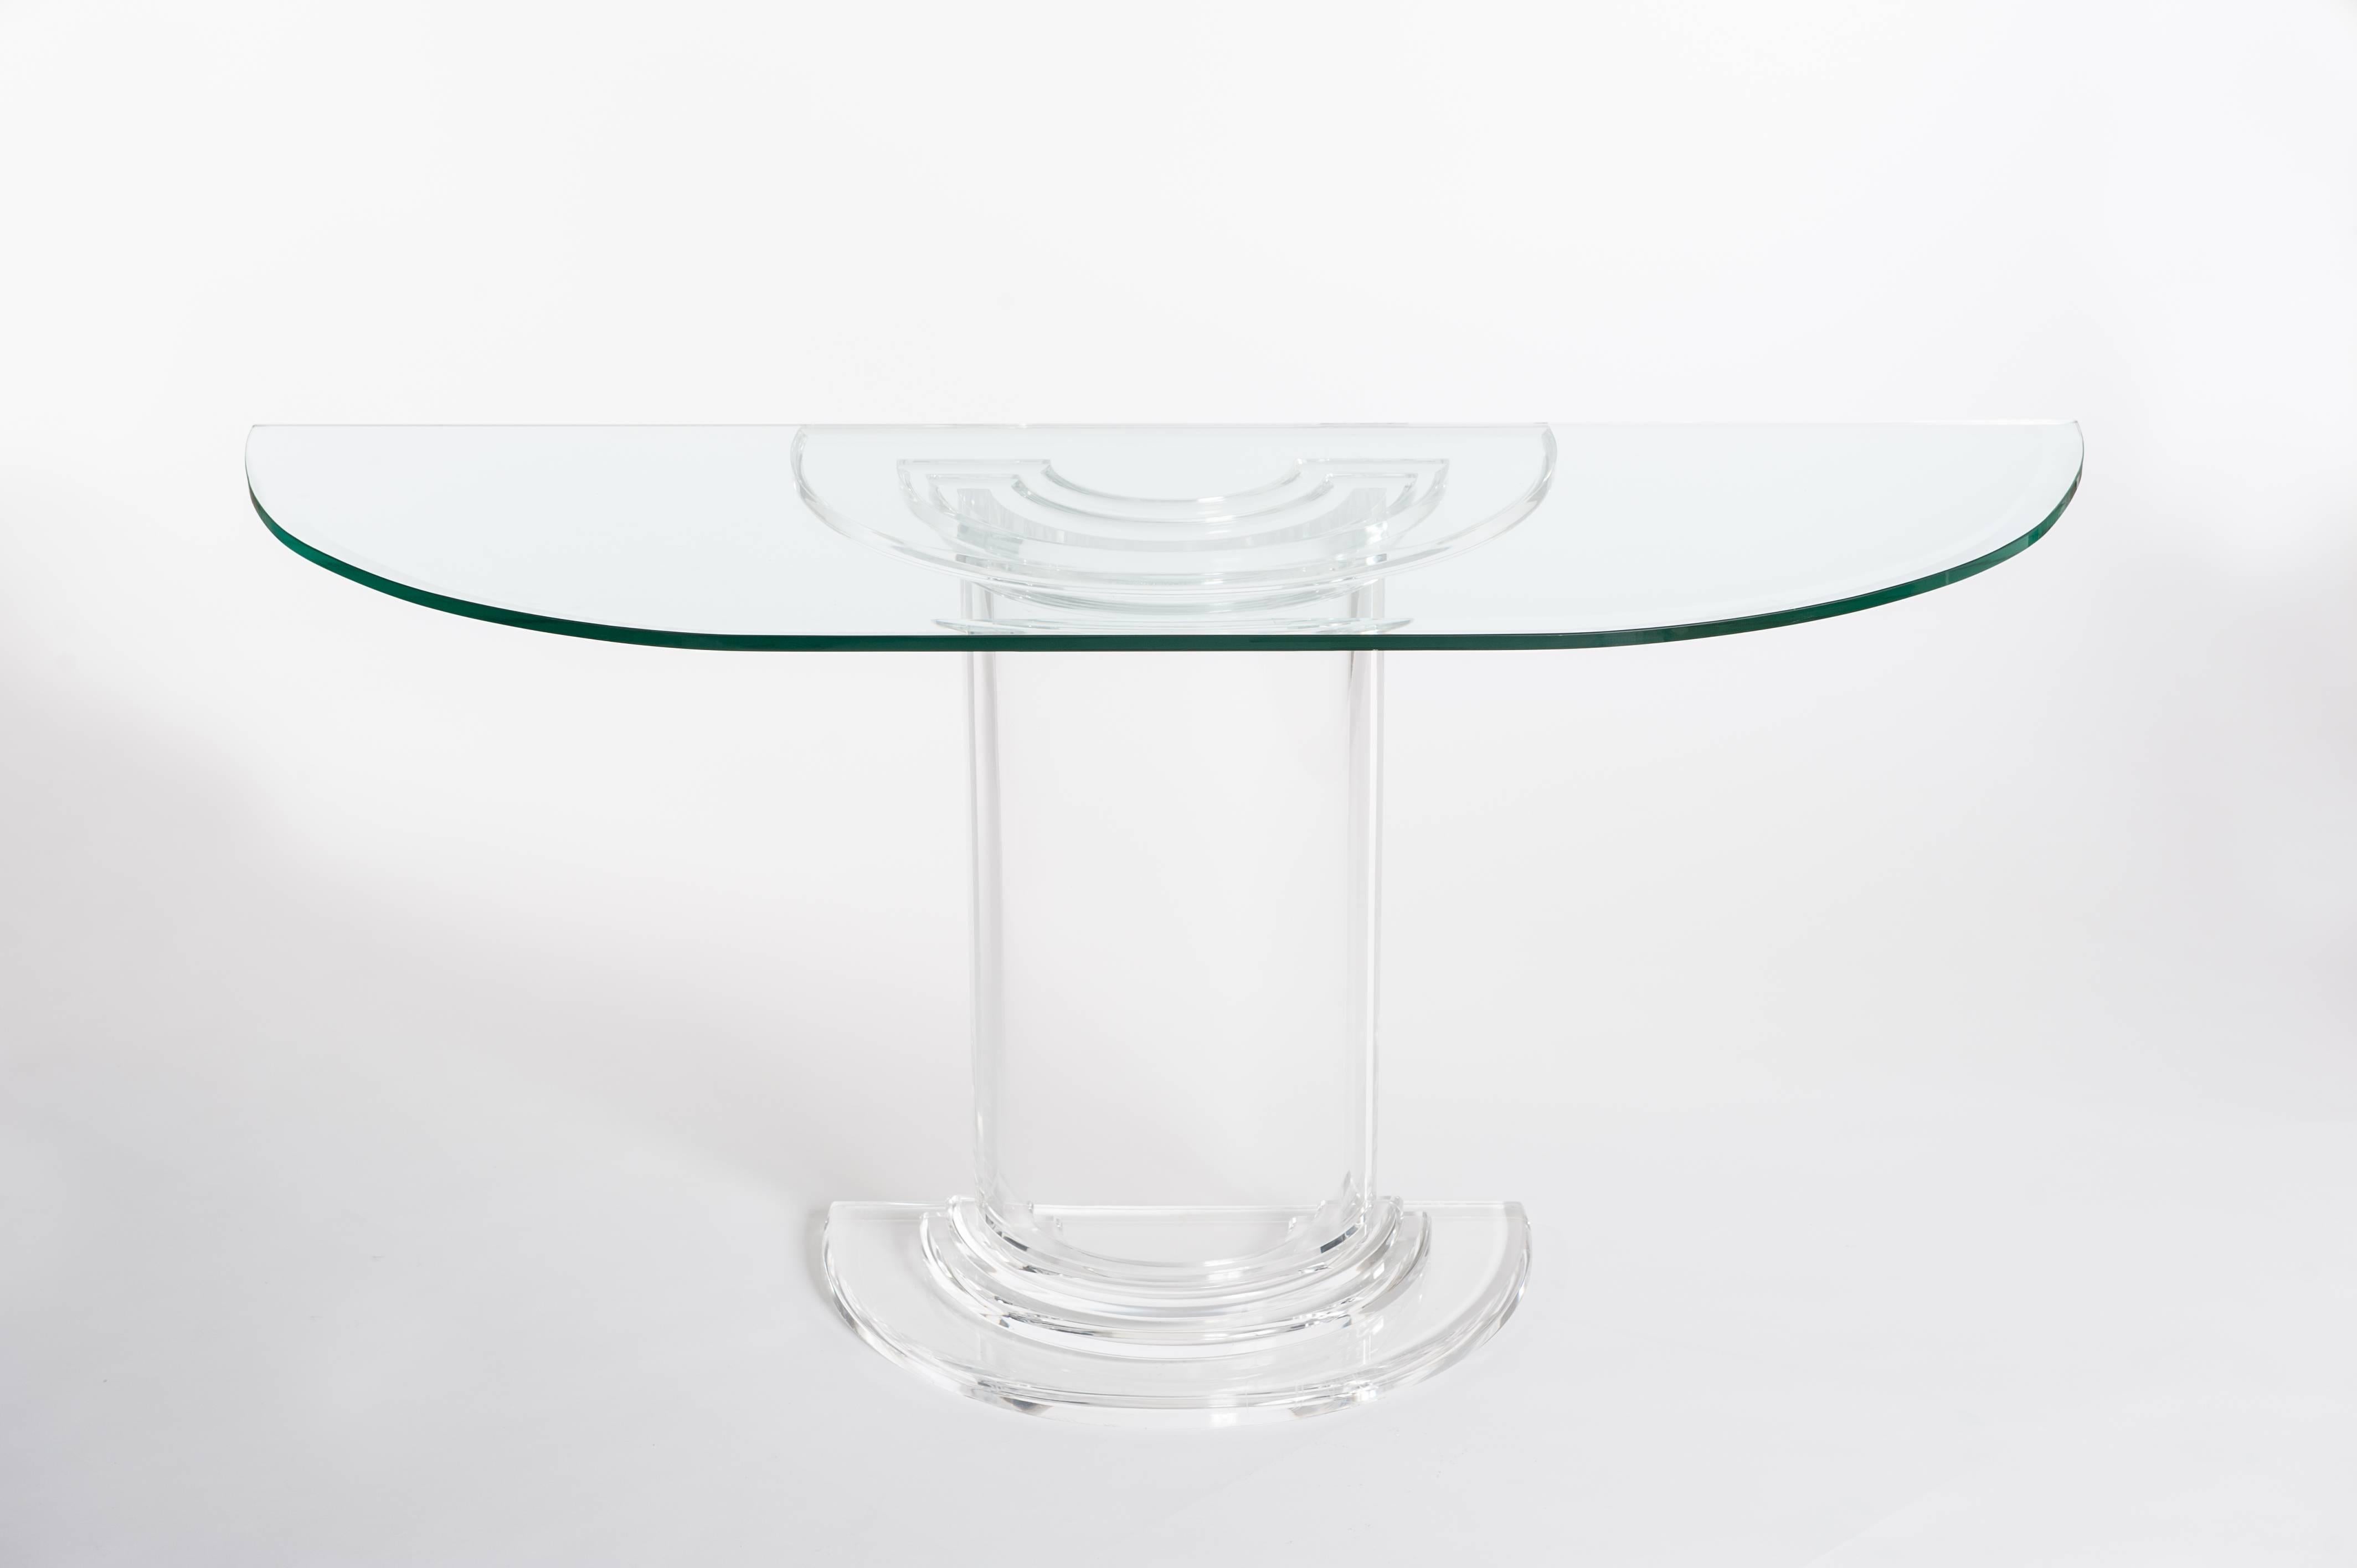 Midcentury Italian halfmoon, transparent plexiglass console table with crystal glass table top (thickness of glass 1.5cm, faceted by 3.0cm)
The base consists of plexiglass and is ribbed on top and bottom (thickness of plexi glass 3.0cm)
The optic is